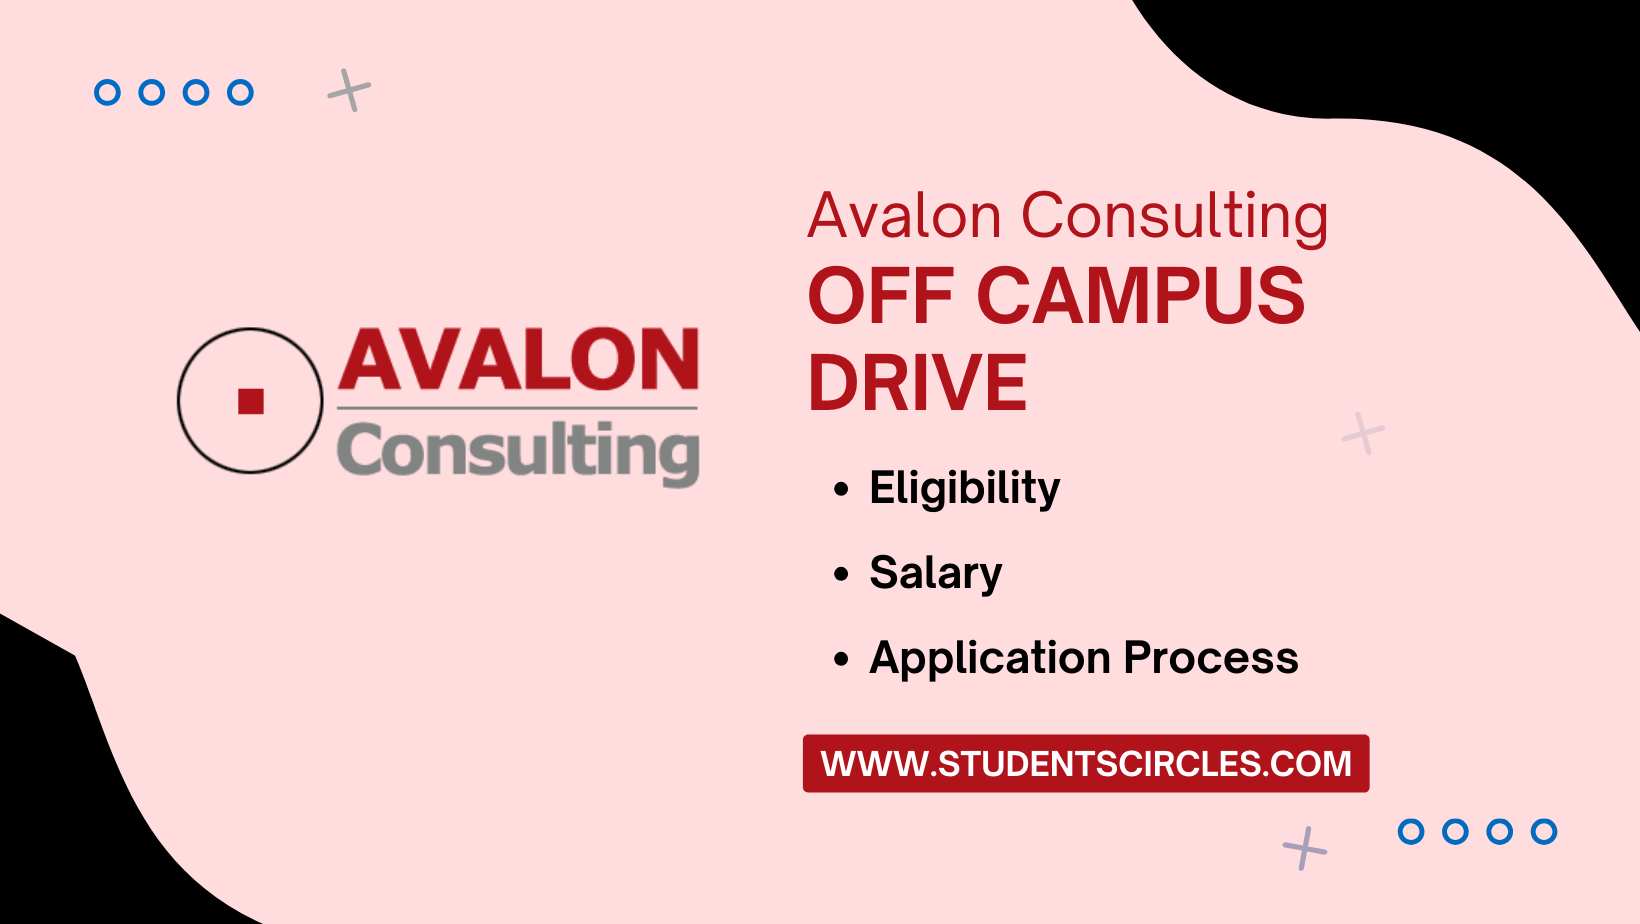 Avalon Consulting Off Campus Drive